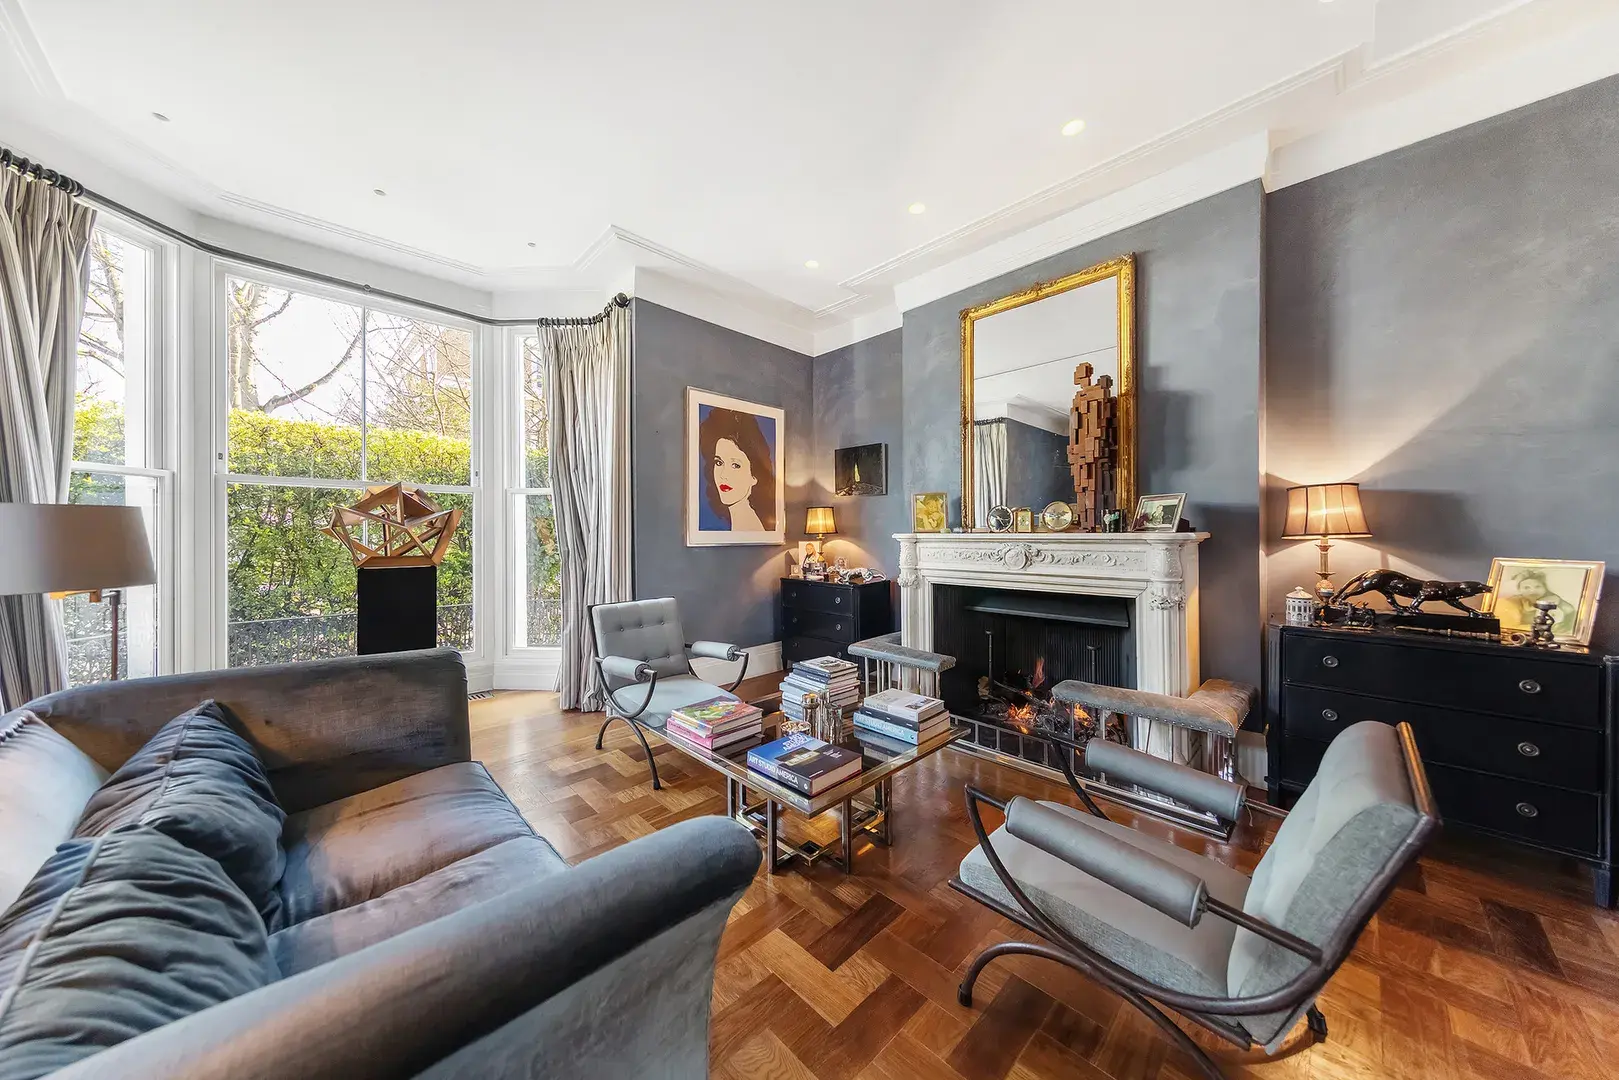 Holland Villas Road, holiday home in Notting Hill, London